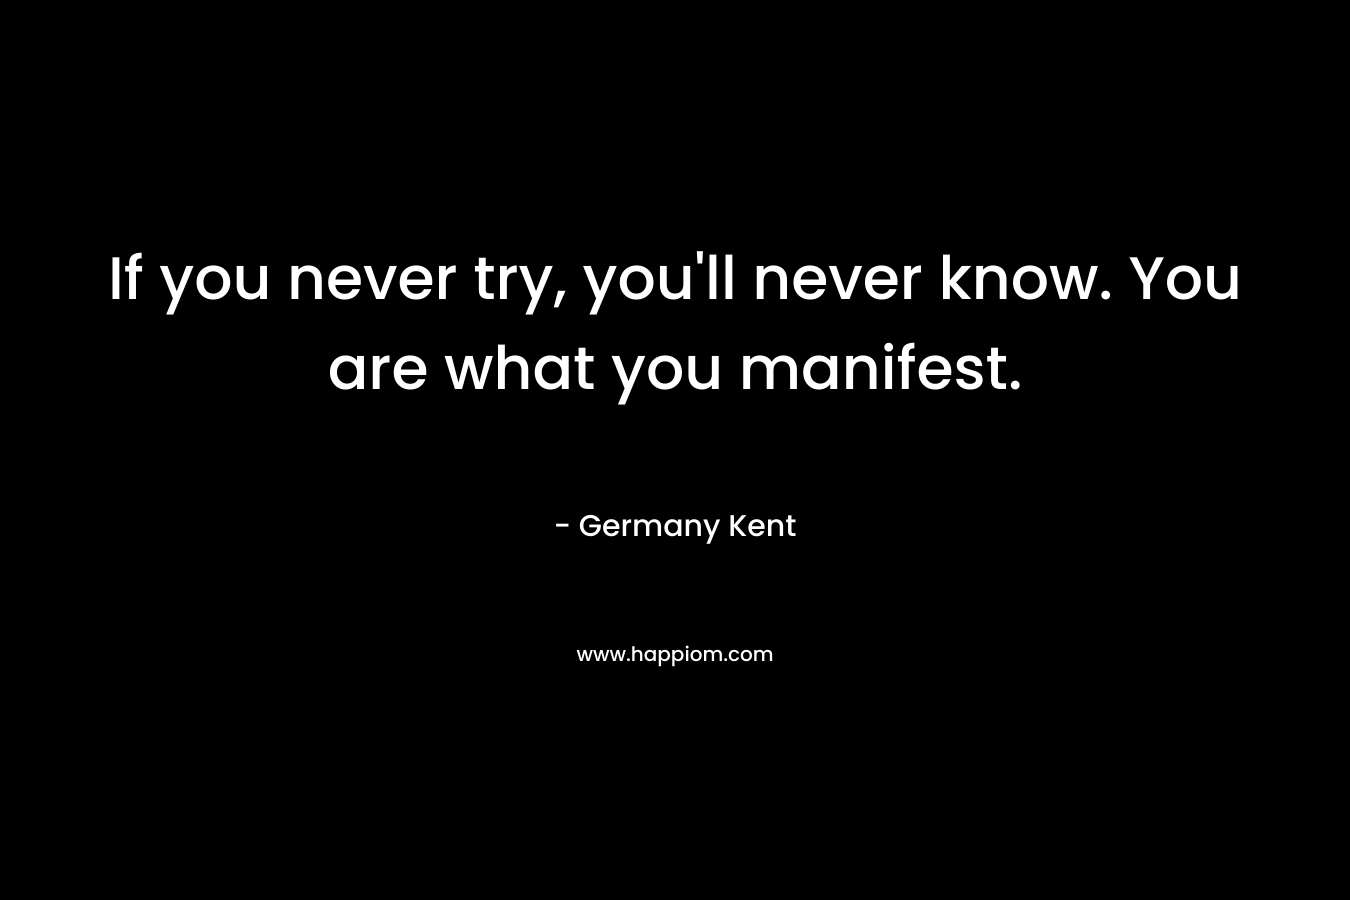 If you never try, you'll never know. You are what you manifest.